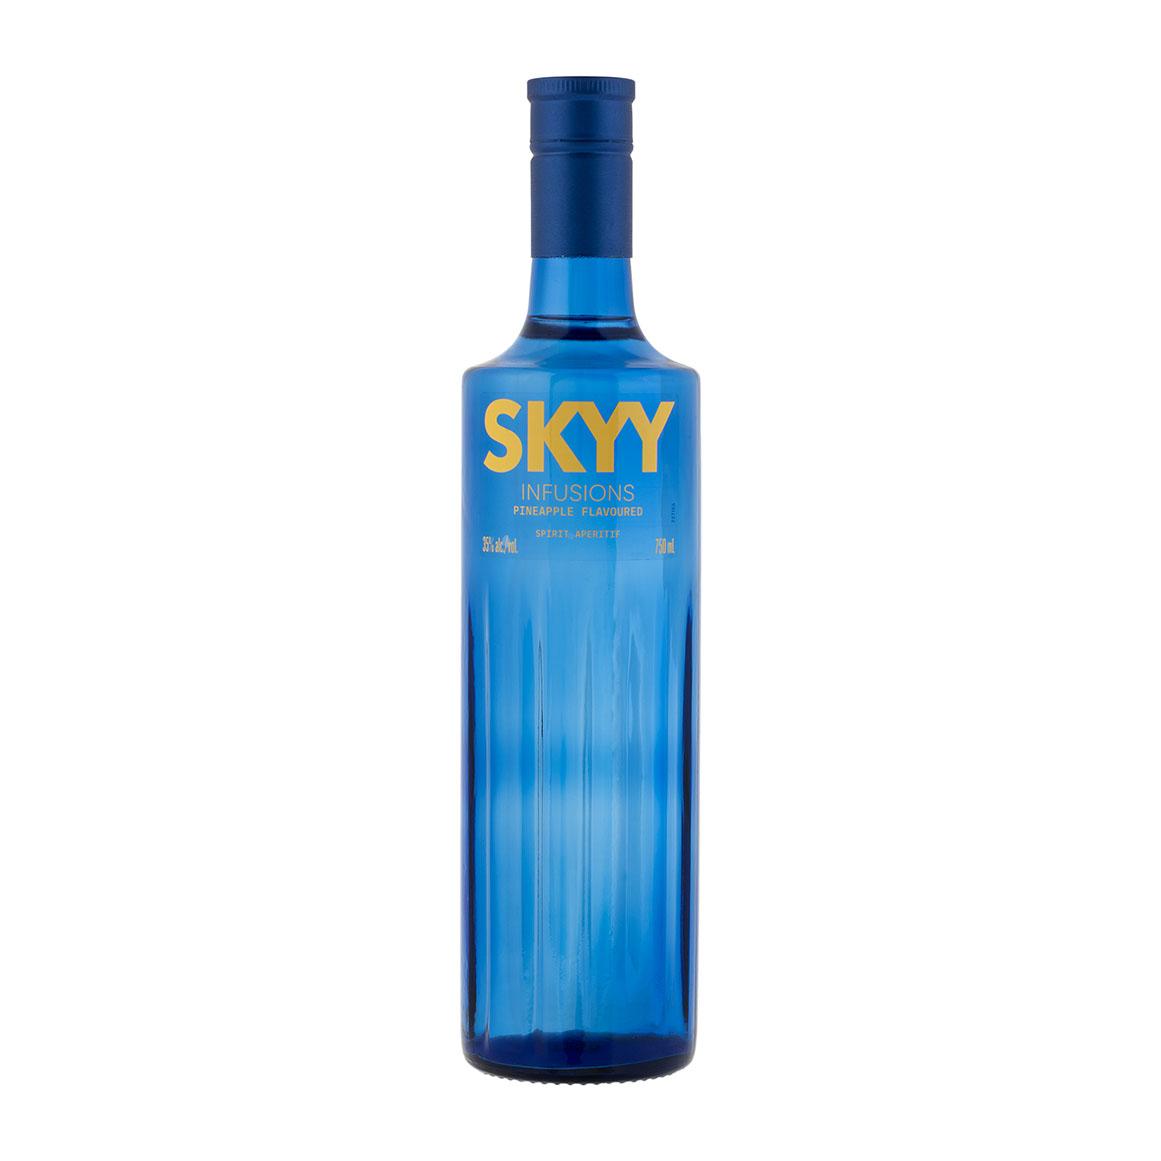 Skyy Infusions Pineapple Flavoured